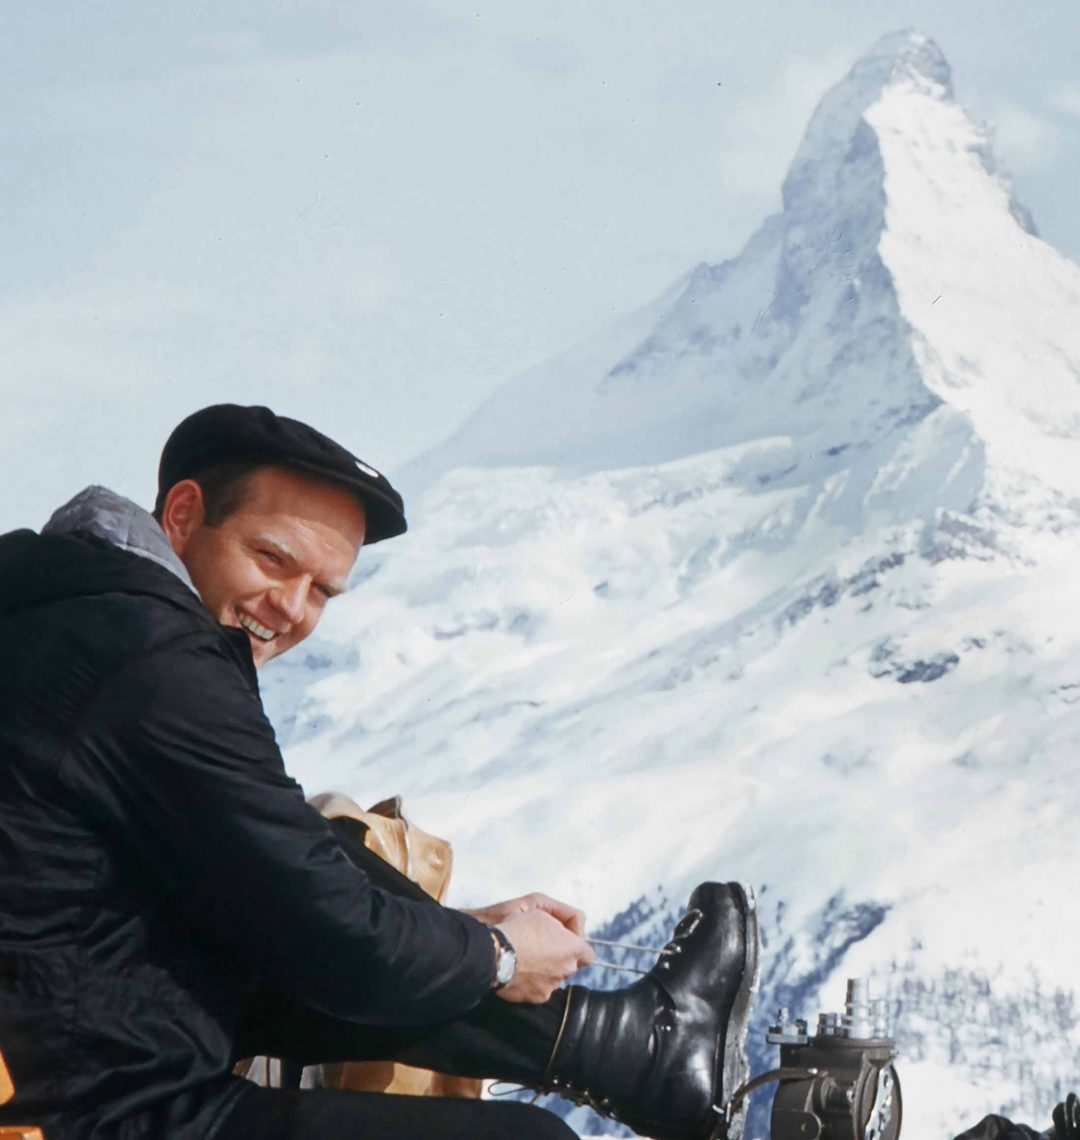 Ski Pioneer Film-Maker Warren Miller lacing up at the Matterhorn. His beautiful and fun-filled films brought new people to skiing in the 60s and 70s. The WME company continues to produce over the top visual feasts.